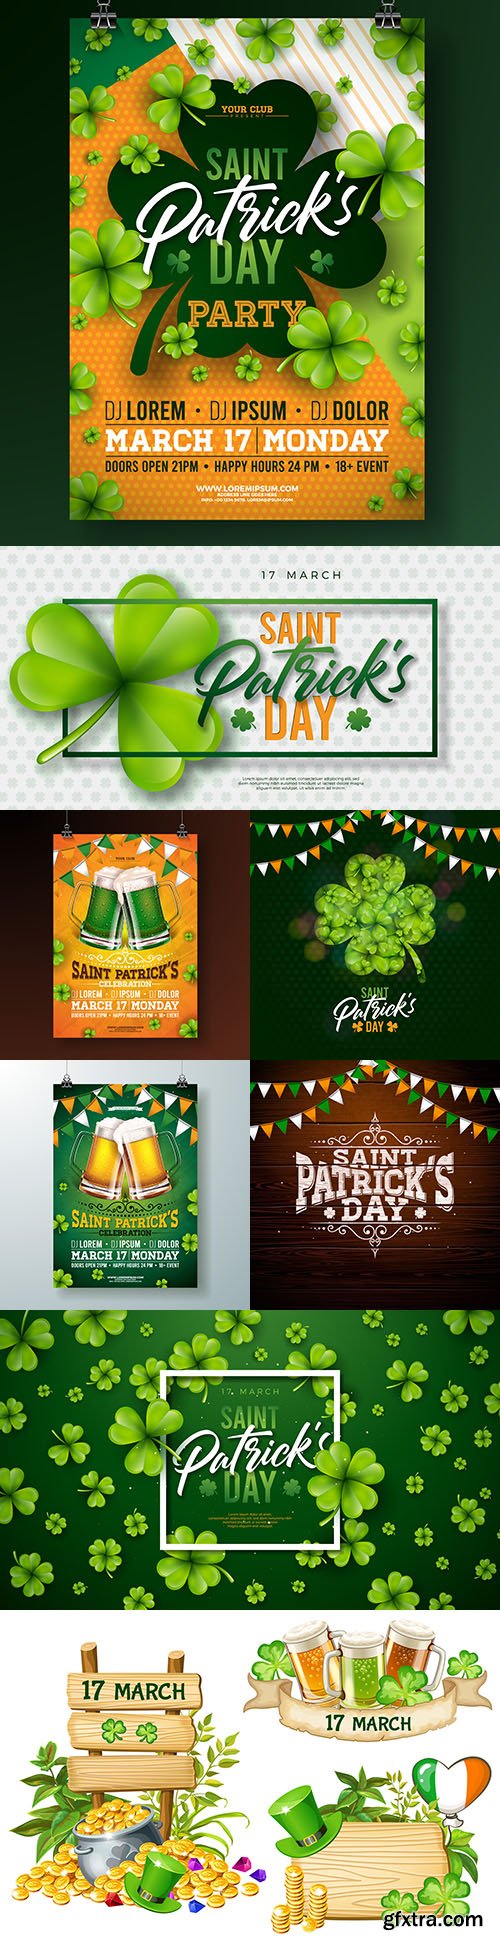 Saint Patrick \'s day with leaves clover design flyer